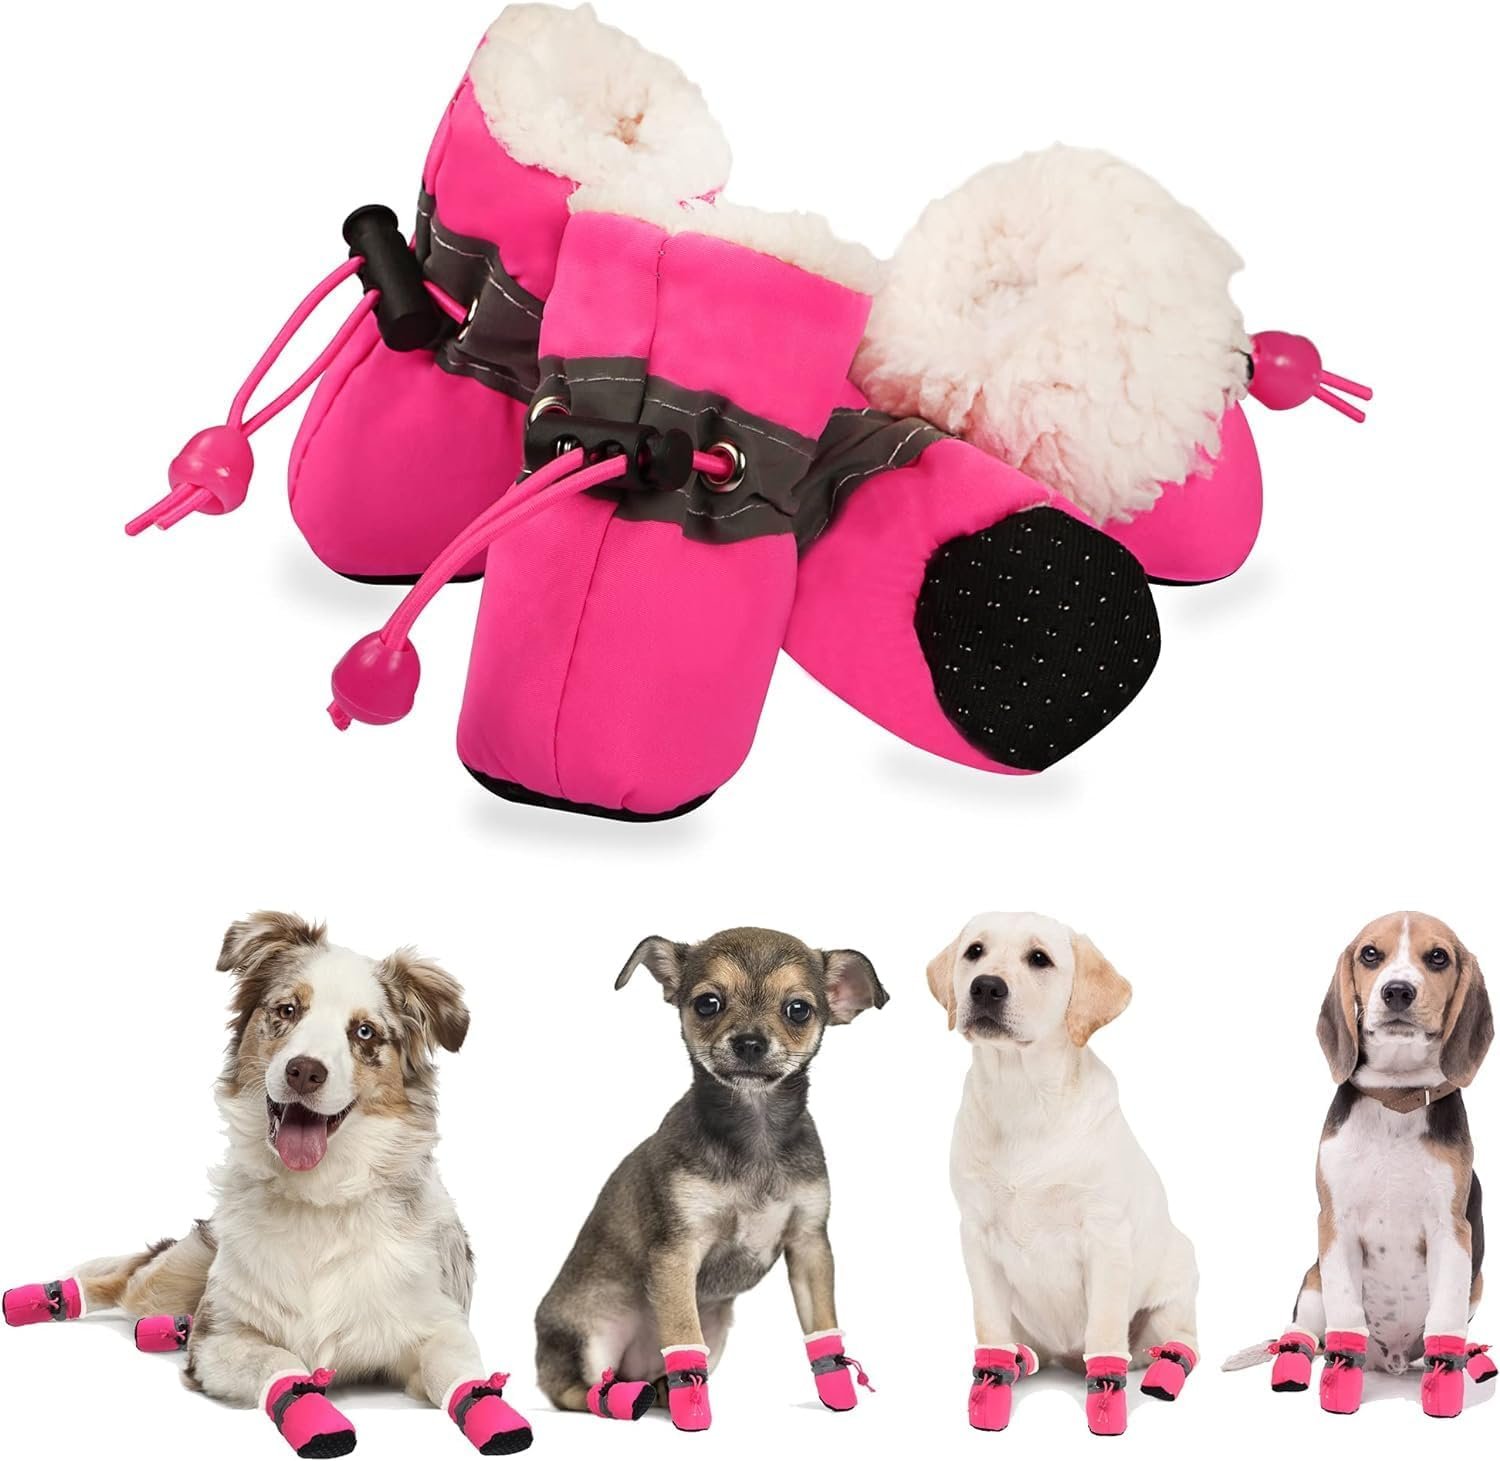 YAODHAOD Dog Shoes for Winter, Dog Boots  Paw Protectors, Fleece Warm Snow Booties for Puppy with Reflective Strip Anti-Slip Rubber Sole for Small Medium Size Dogs,Size 3: 1.5x1.3 (L*W),Pink